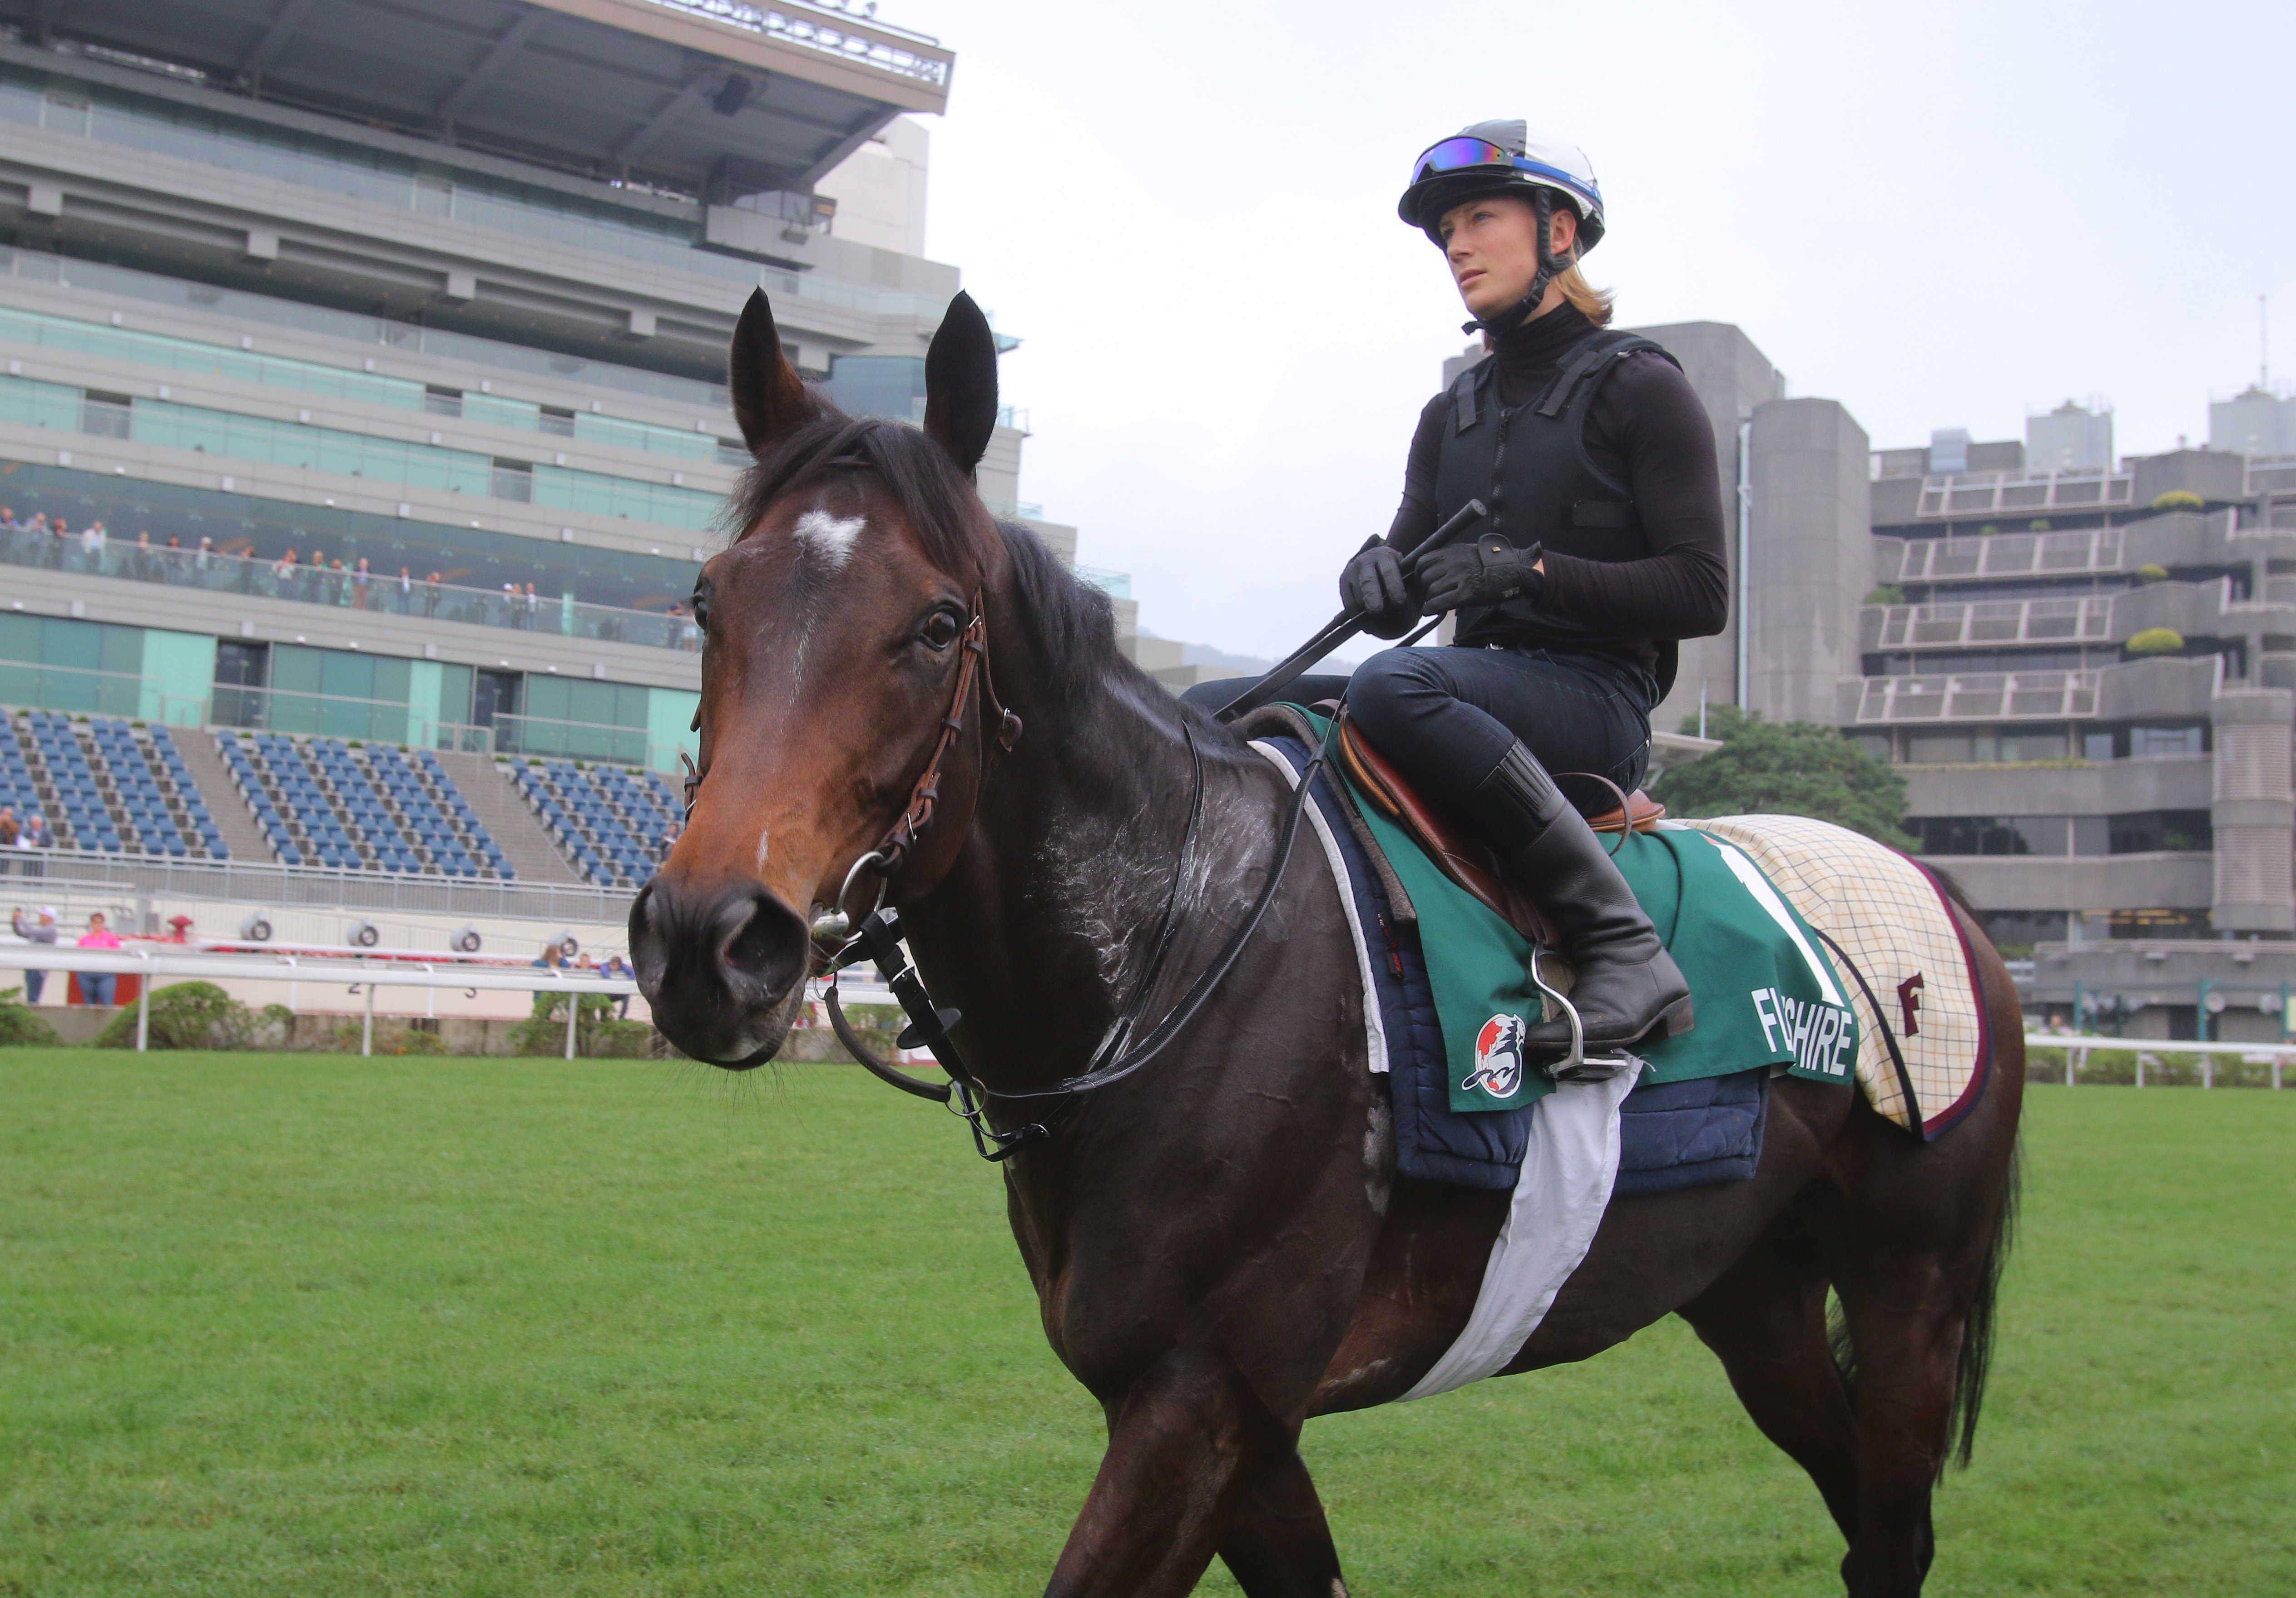 The Hong Kong Vase runner Flintshire going back to stable after gallop on the turf at Sha Tin on 10Dec15.